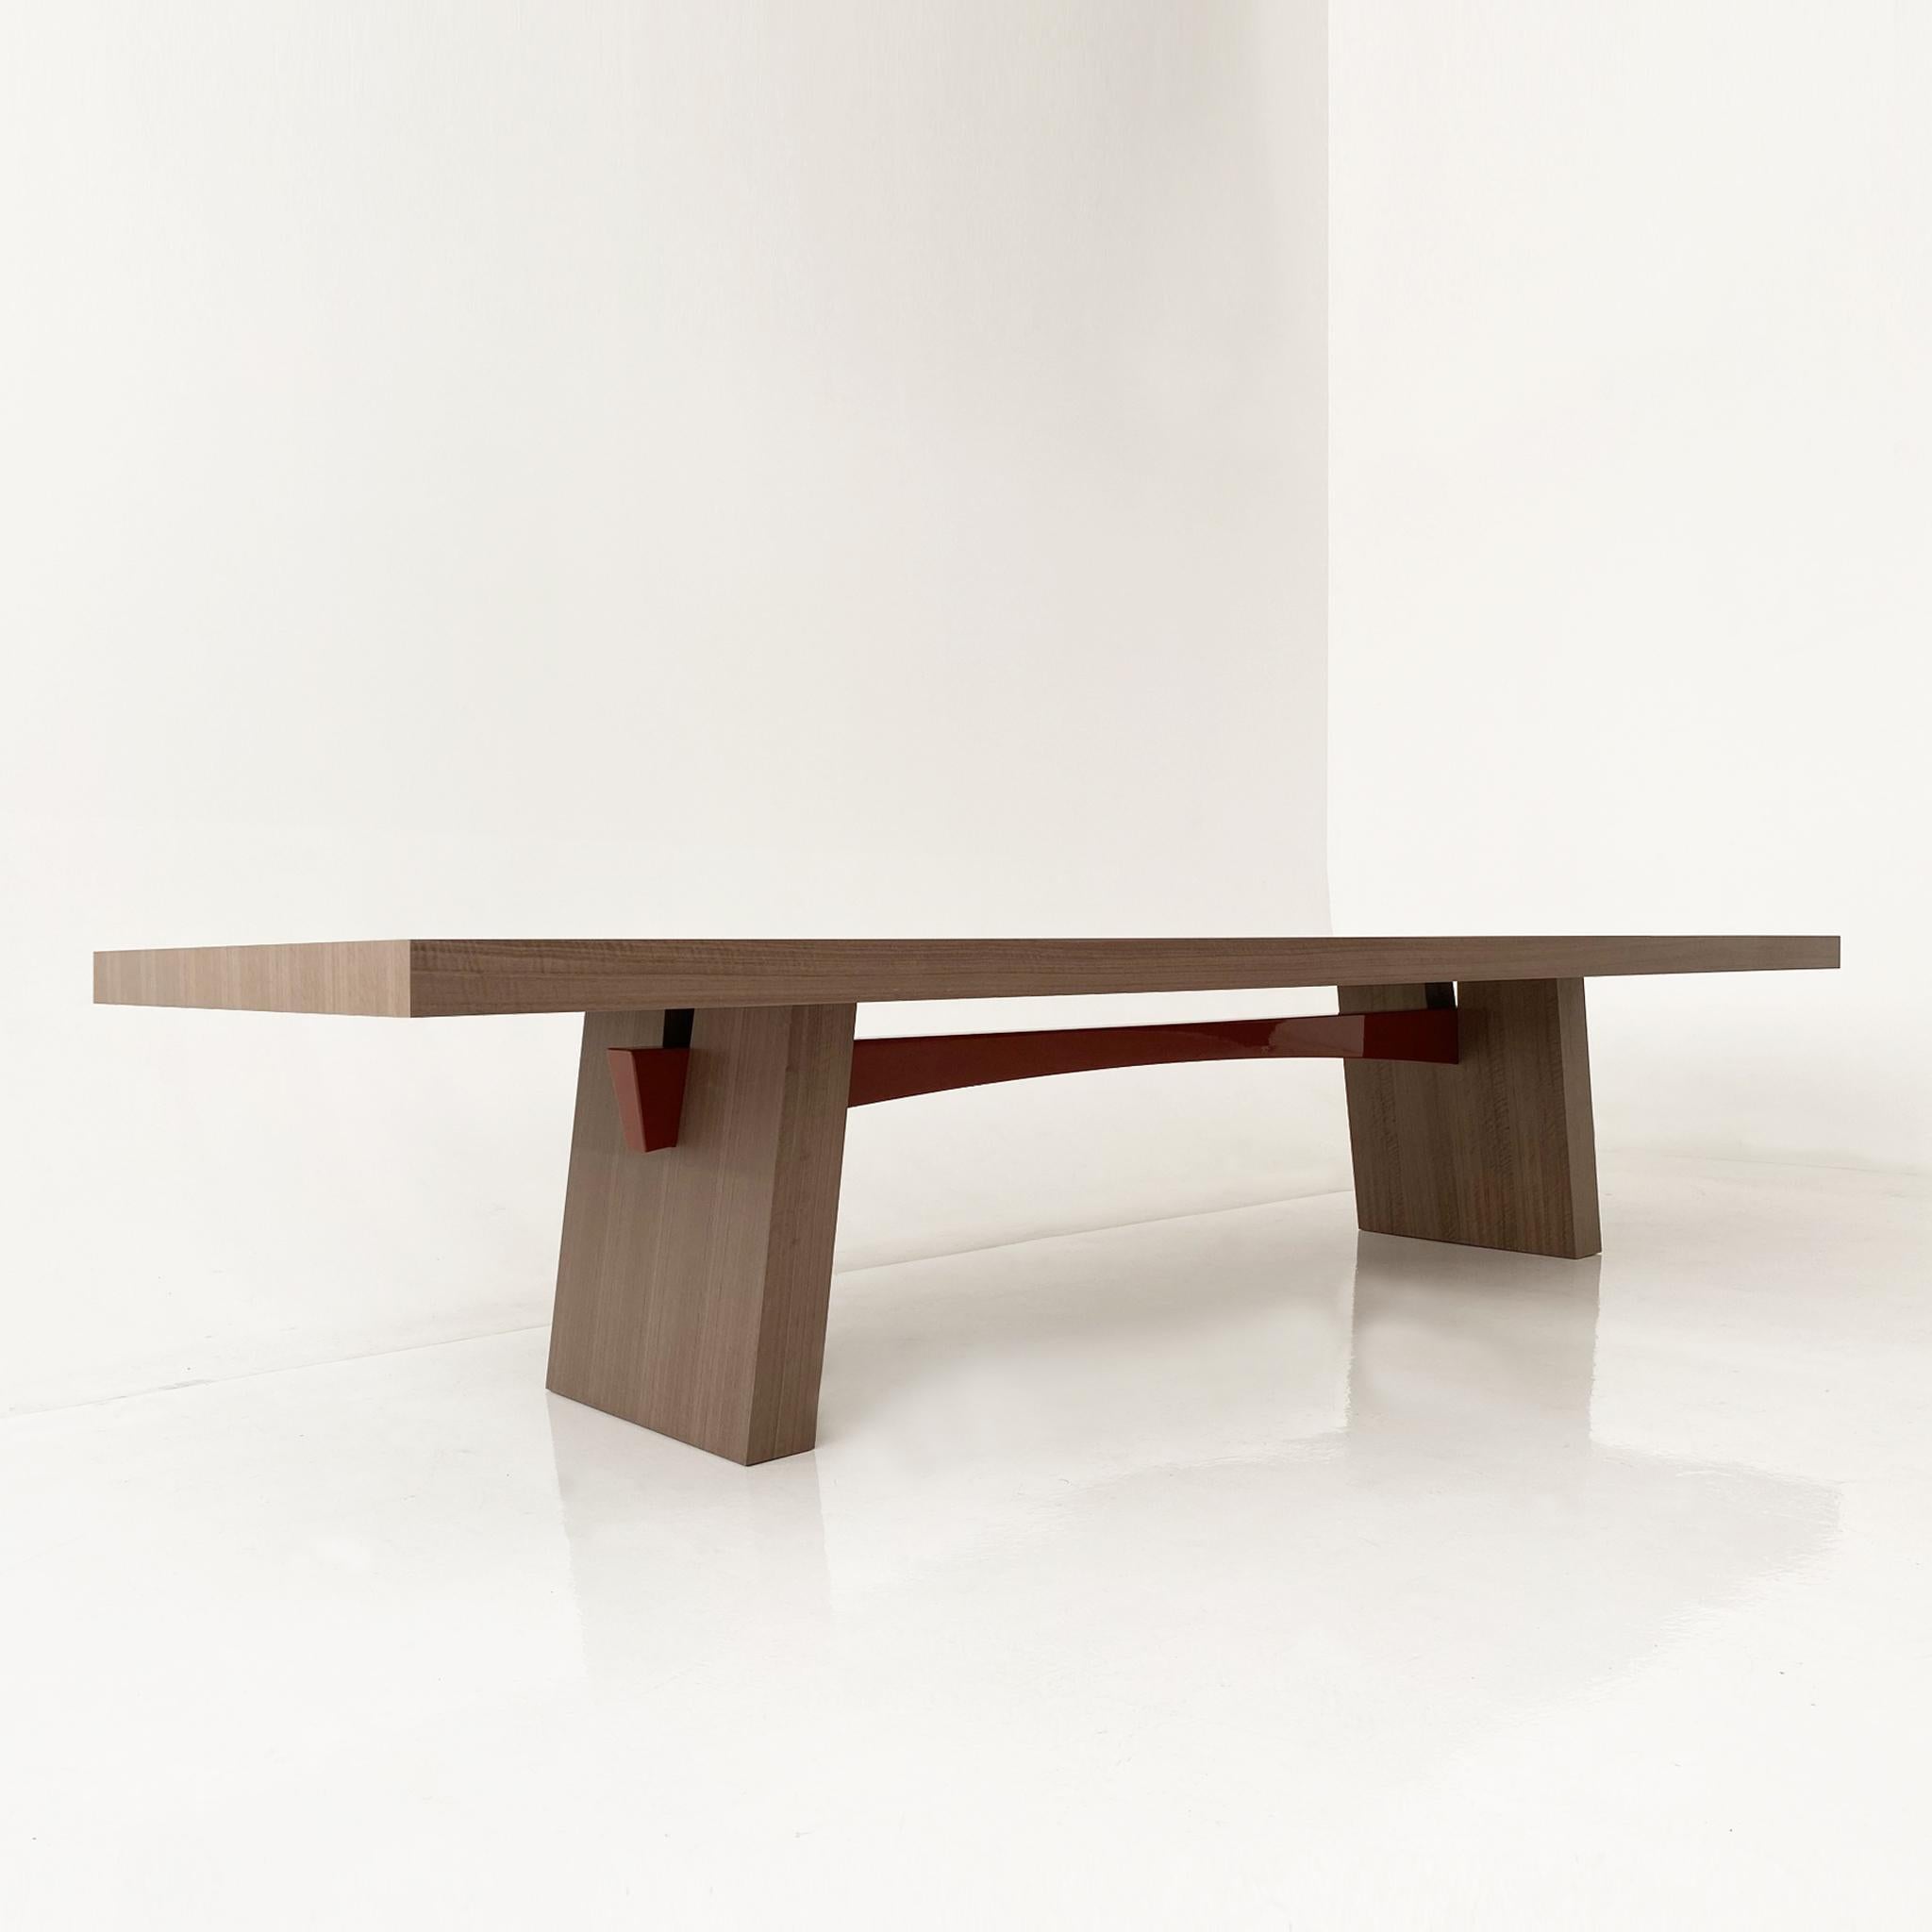 A dining table of generous proportions with a distinctly thick top and angled legs, its sleek design enhanced and enriched by the curve of its contrasting lacquered beam.
Designed in Elm wood with a dark-red gloss-lacquered beam, the WA table is